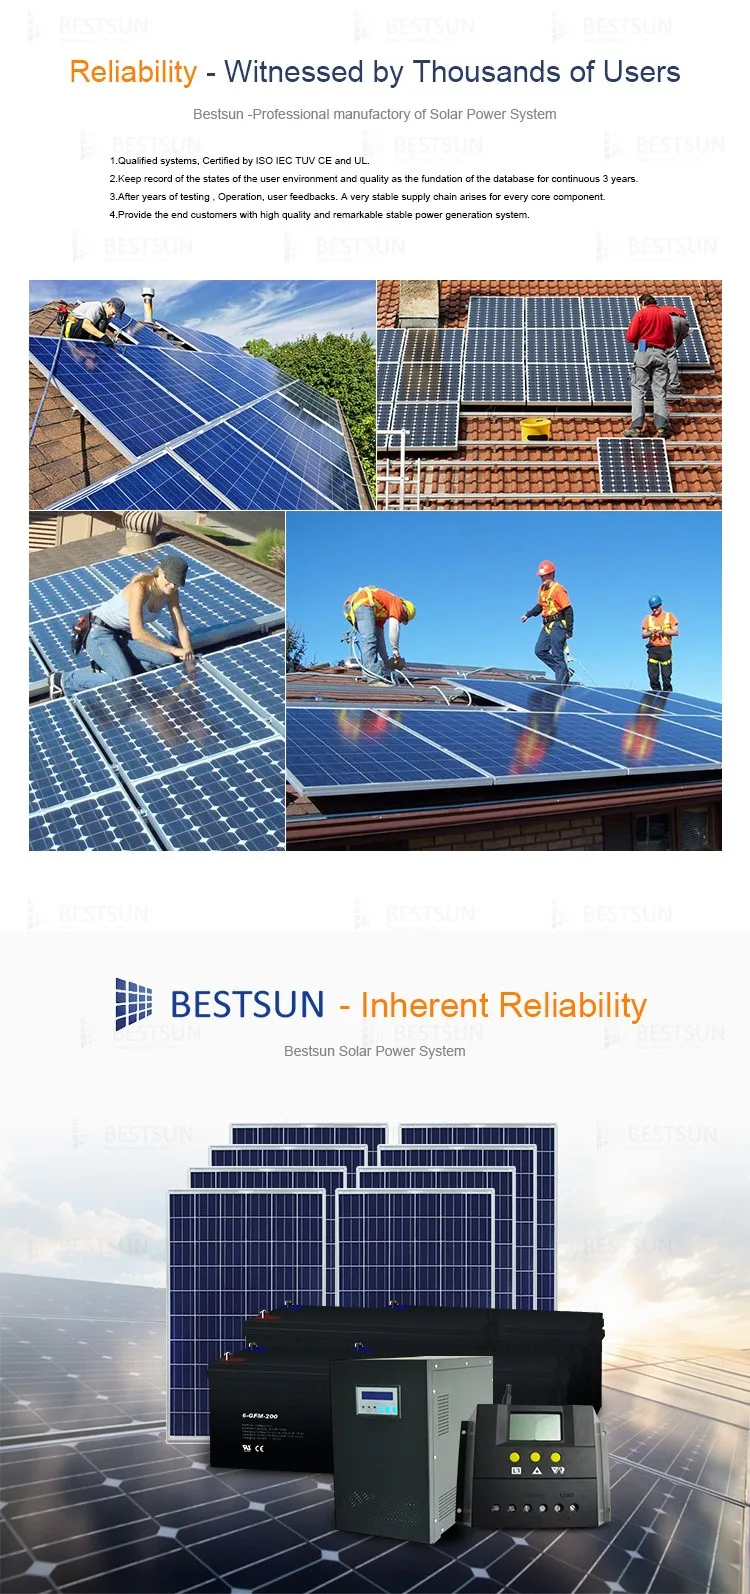  System Output - Buy Solar Power System,Solar Power System For Home,3kw